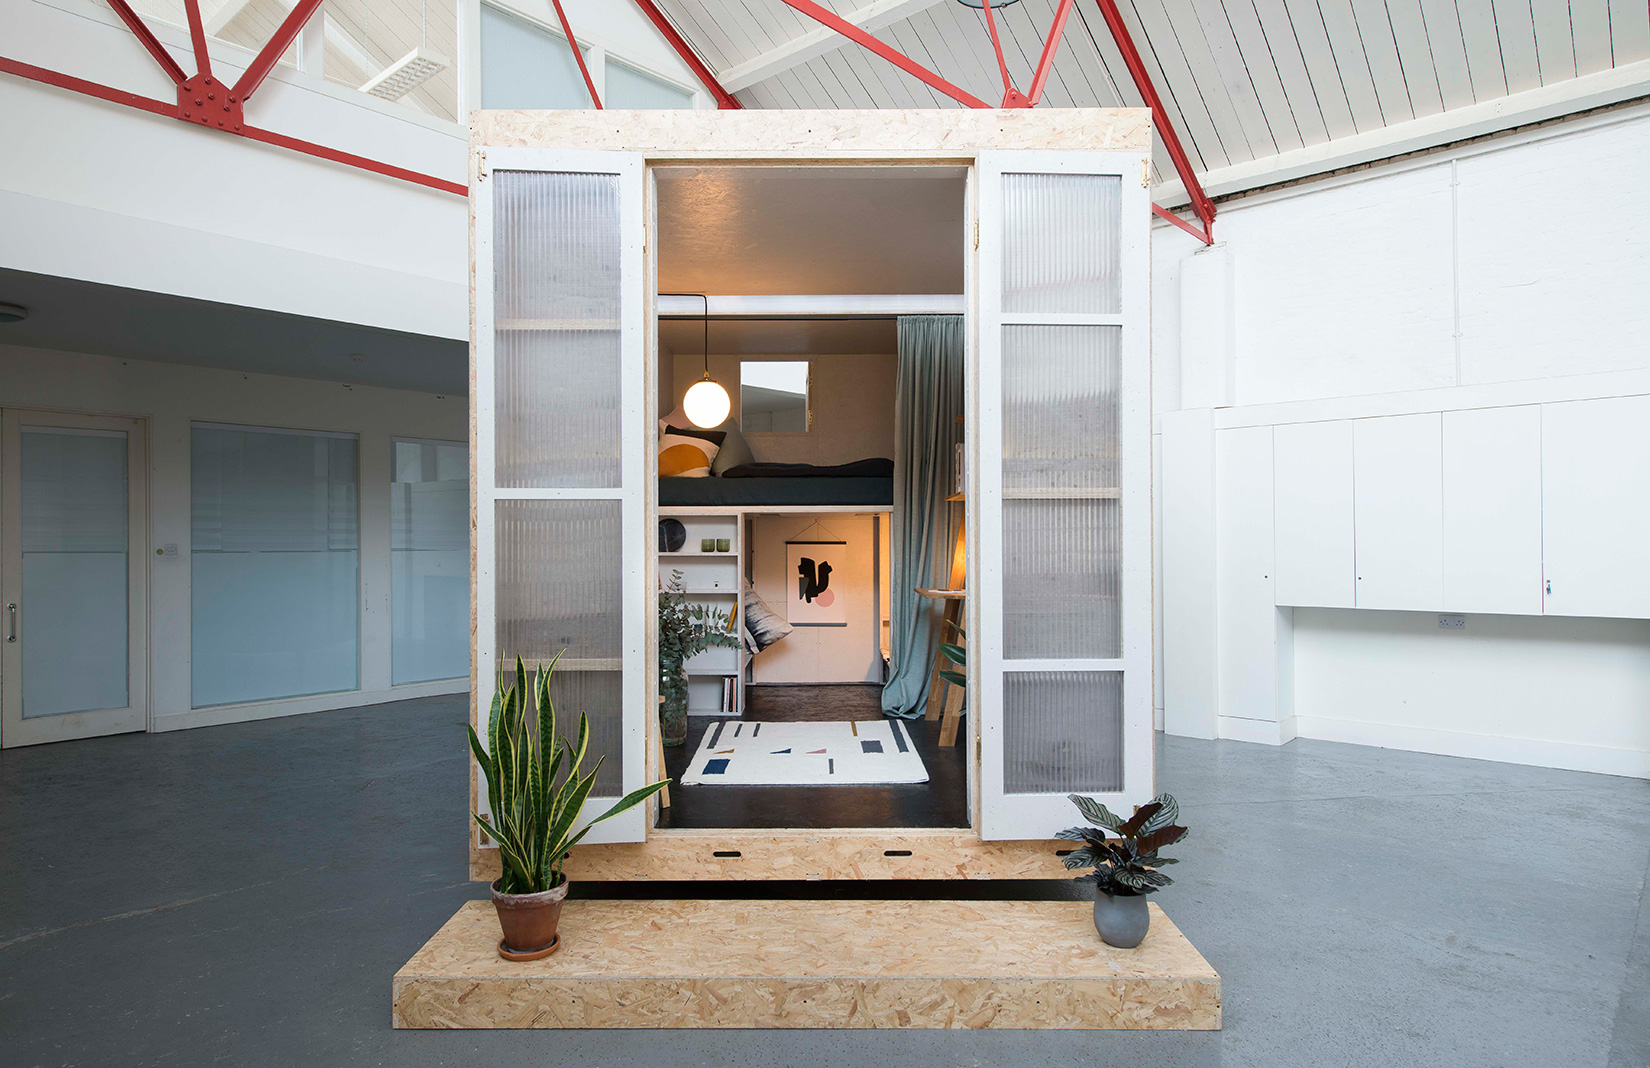 SHED homes are coming to London – with rents starting from £300 a month